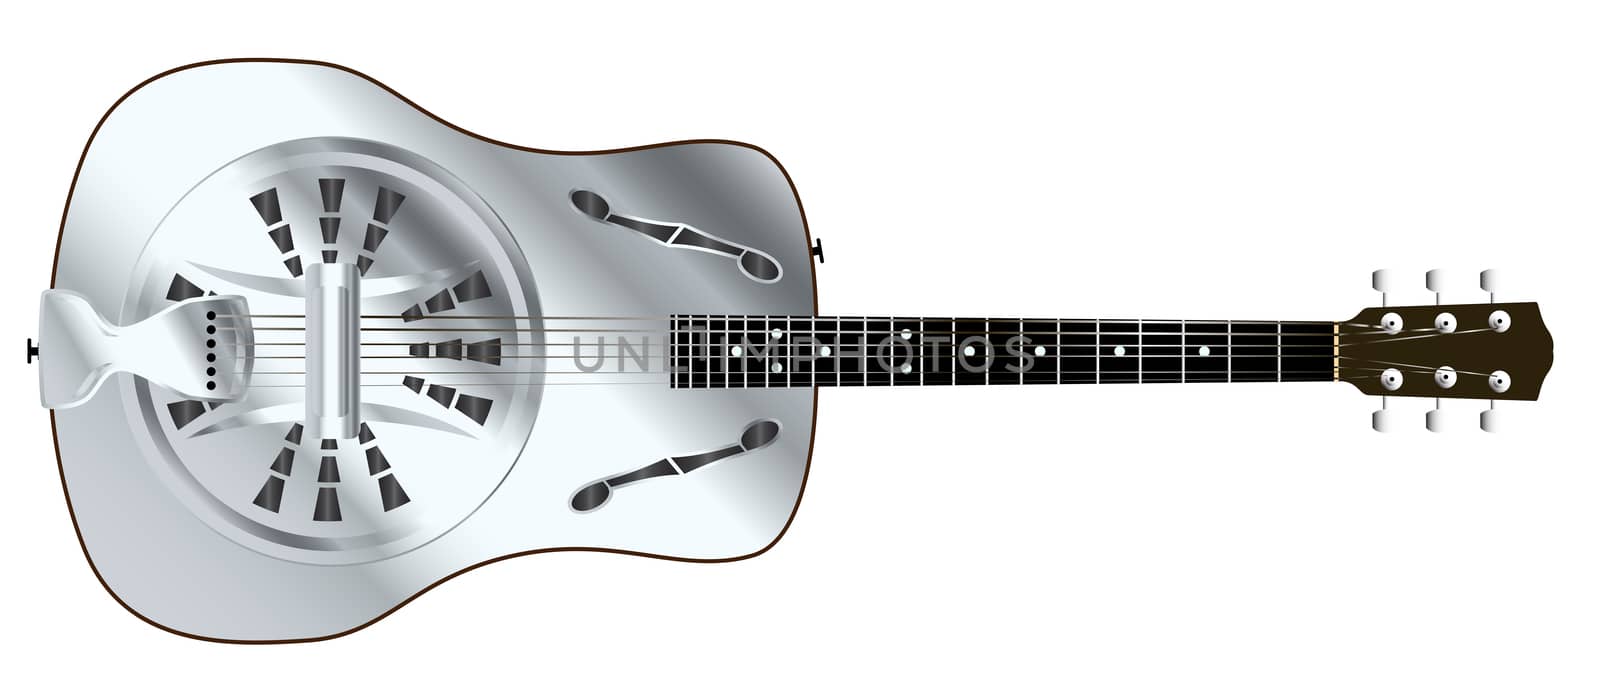 A typical metal resonator acoustic guitar isolated over a white background.